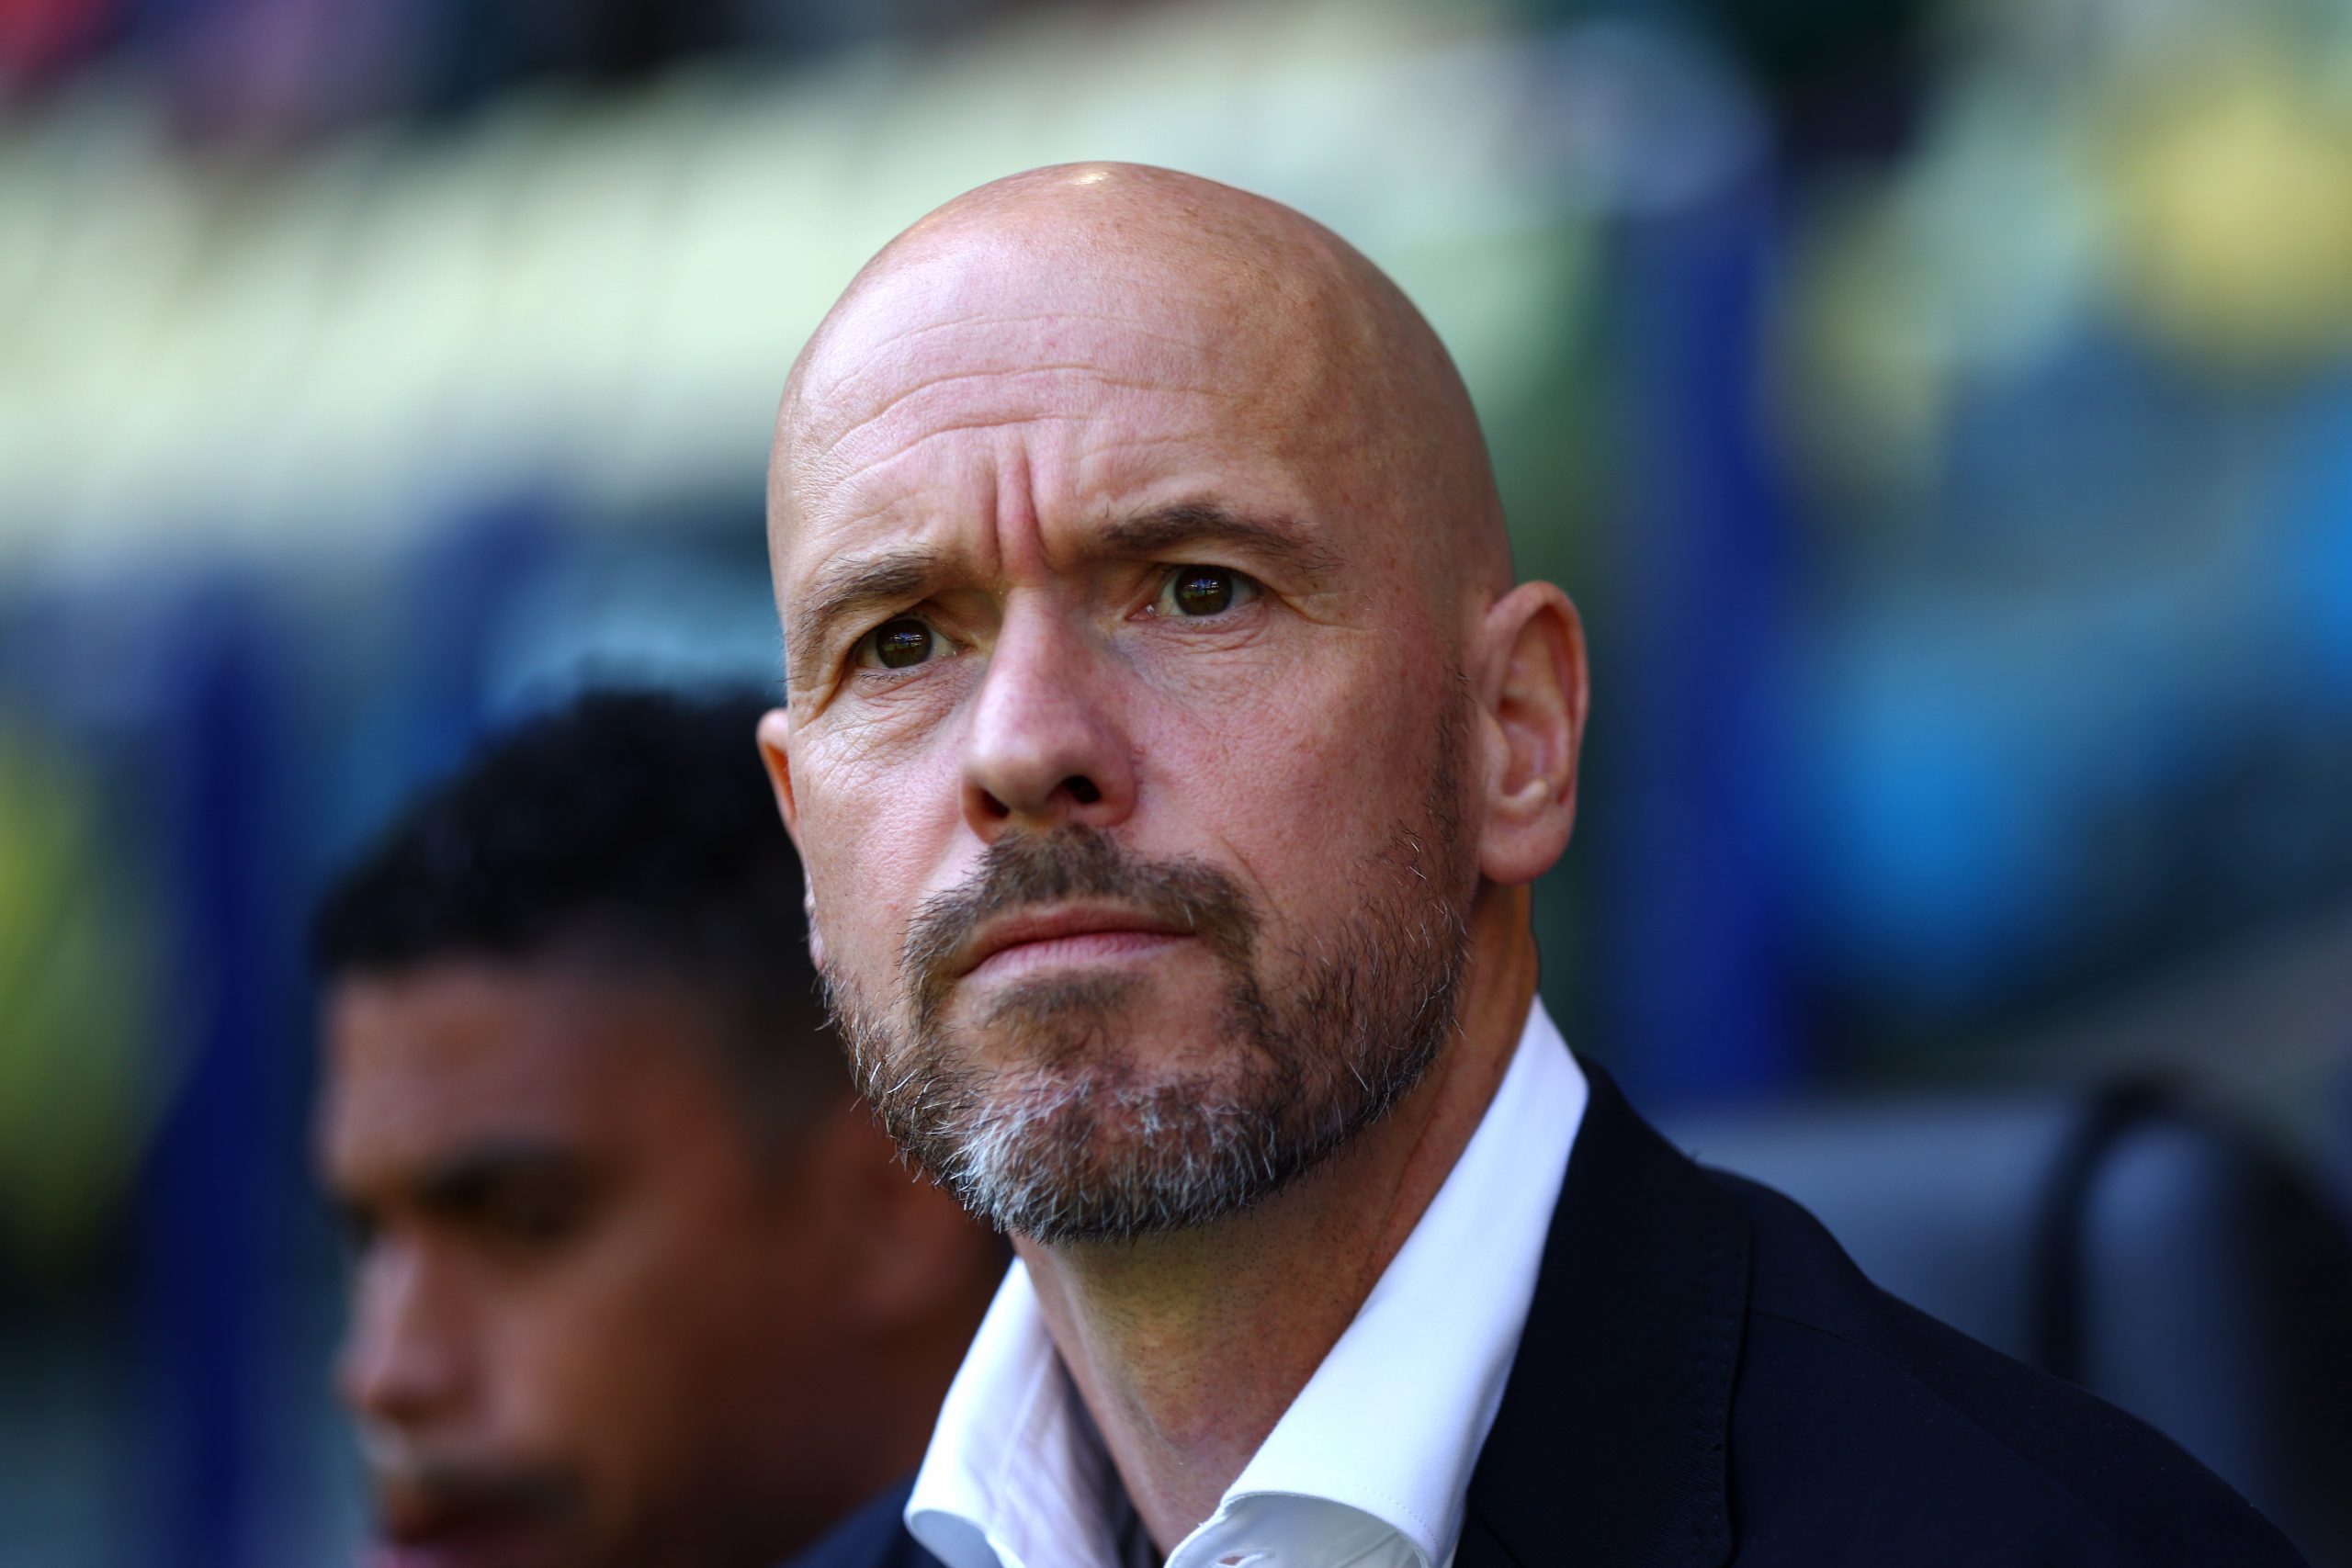 Erik ten Hag believes United can win the title this season. (Photo by Dean Mouhtaropoulos/Getty Images)